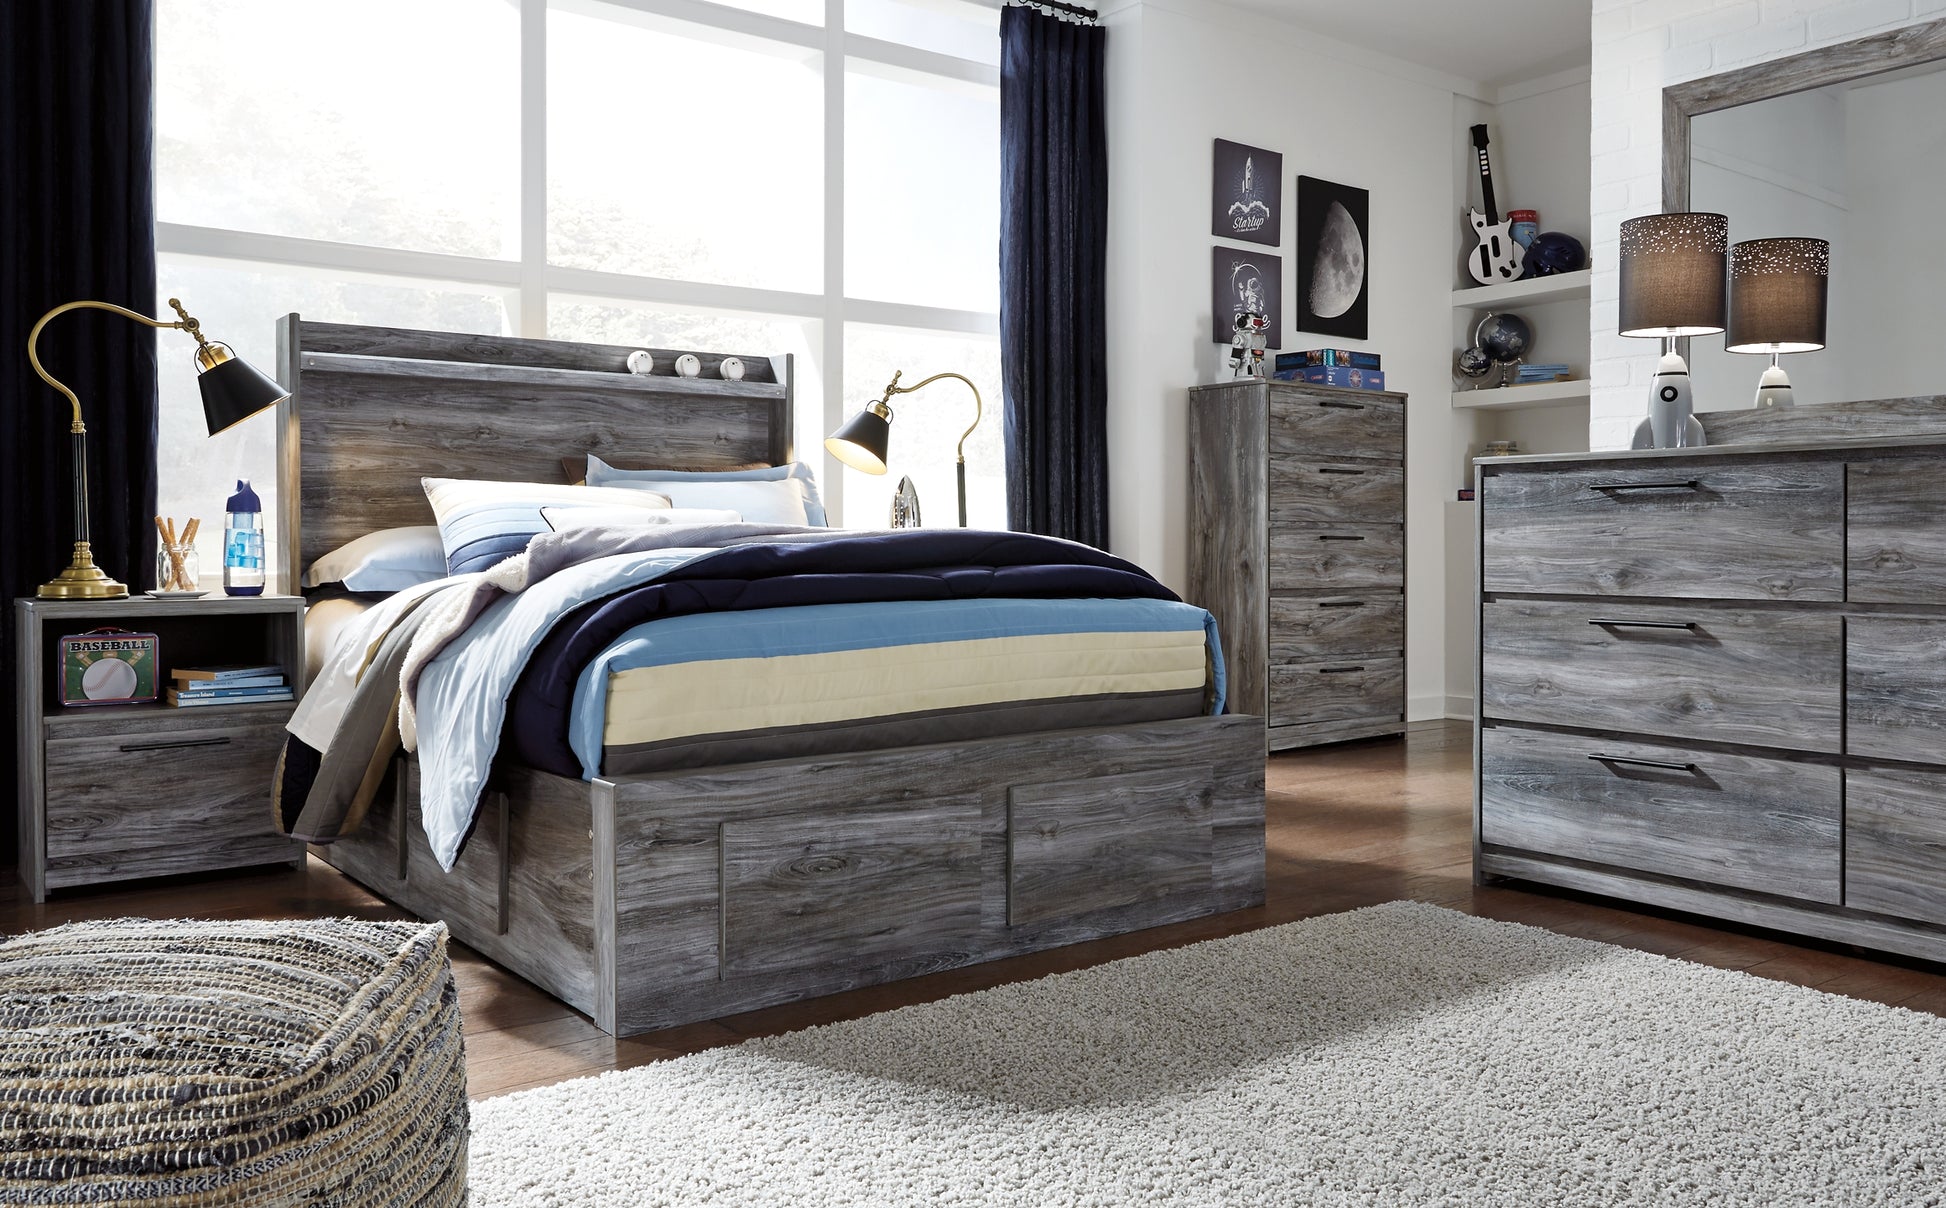 Baystorm Panel Bed With 2 Storage Drawers JB's Furniture Furniture, Bedroom, Accessories